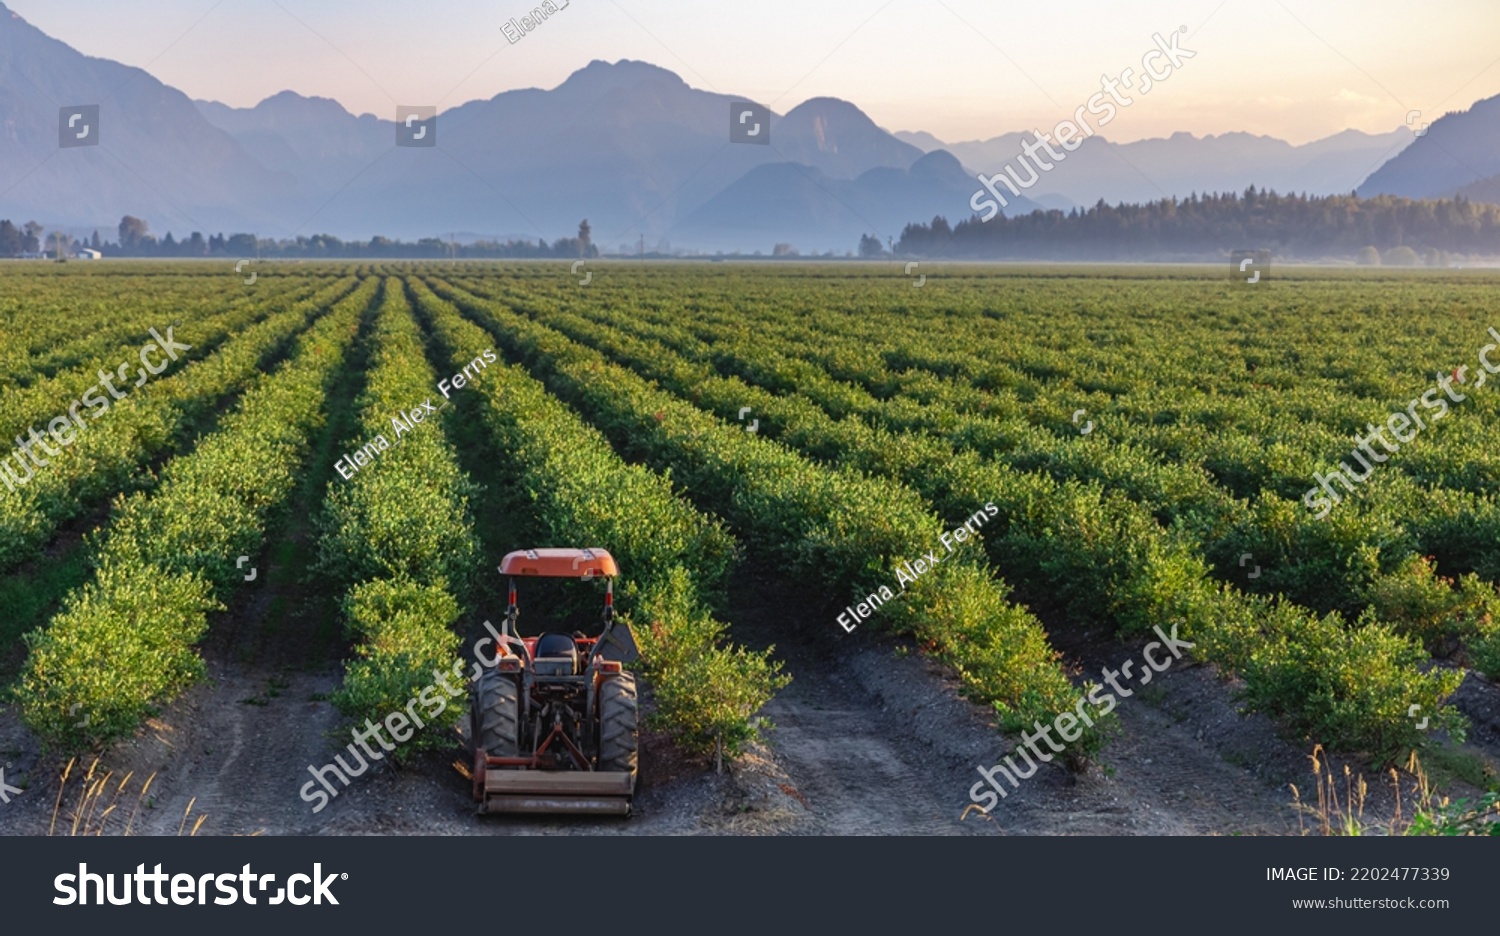 Blueberry field and mountains in the distance in British Columbia, blueberries ready for harvesting. Blueberry farm in Vancouver BC. Nobody, blurred, selective focus #2202477339